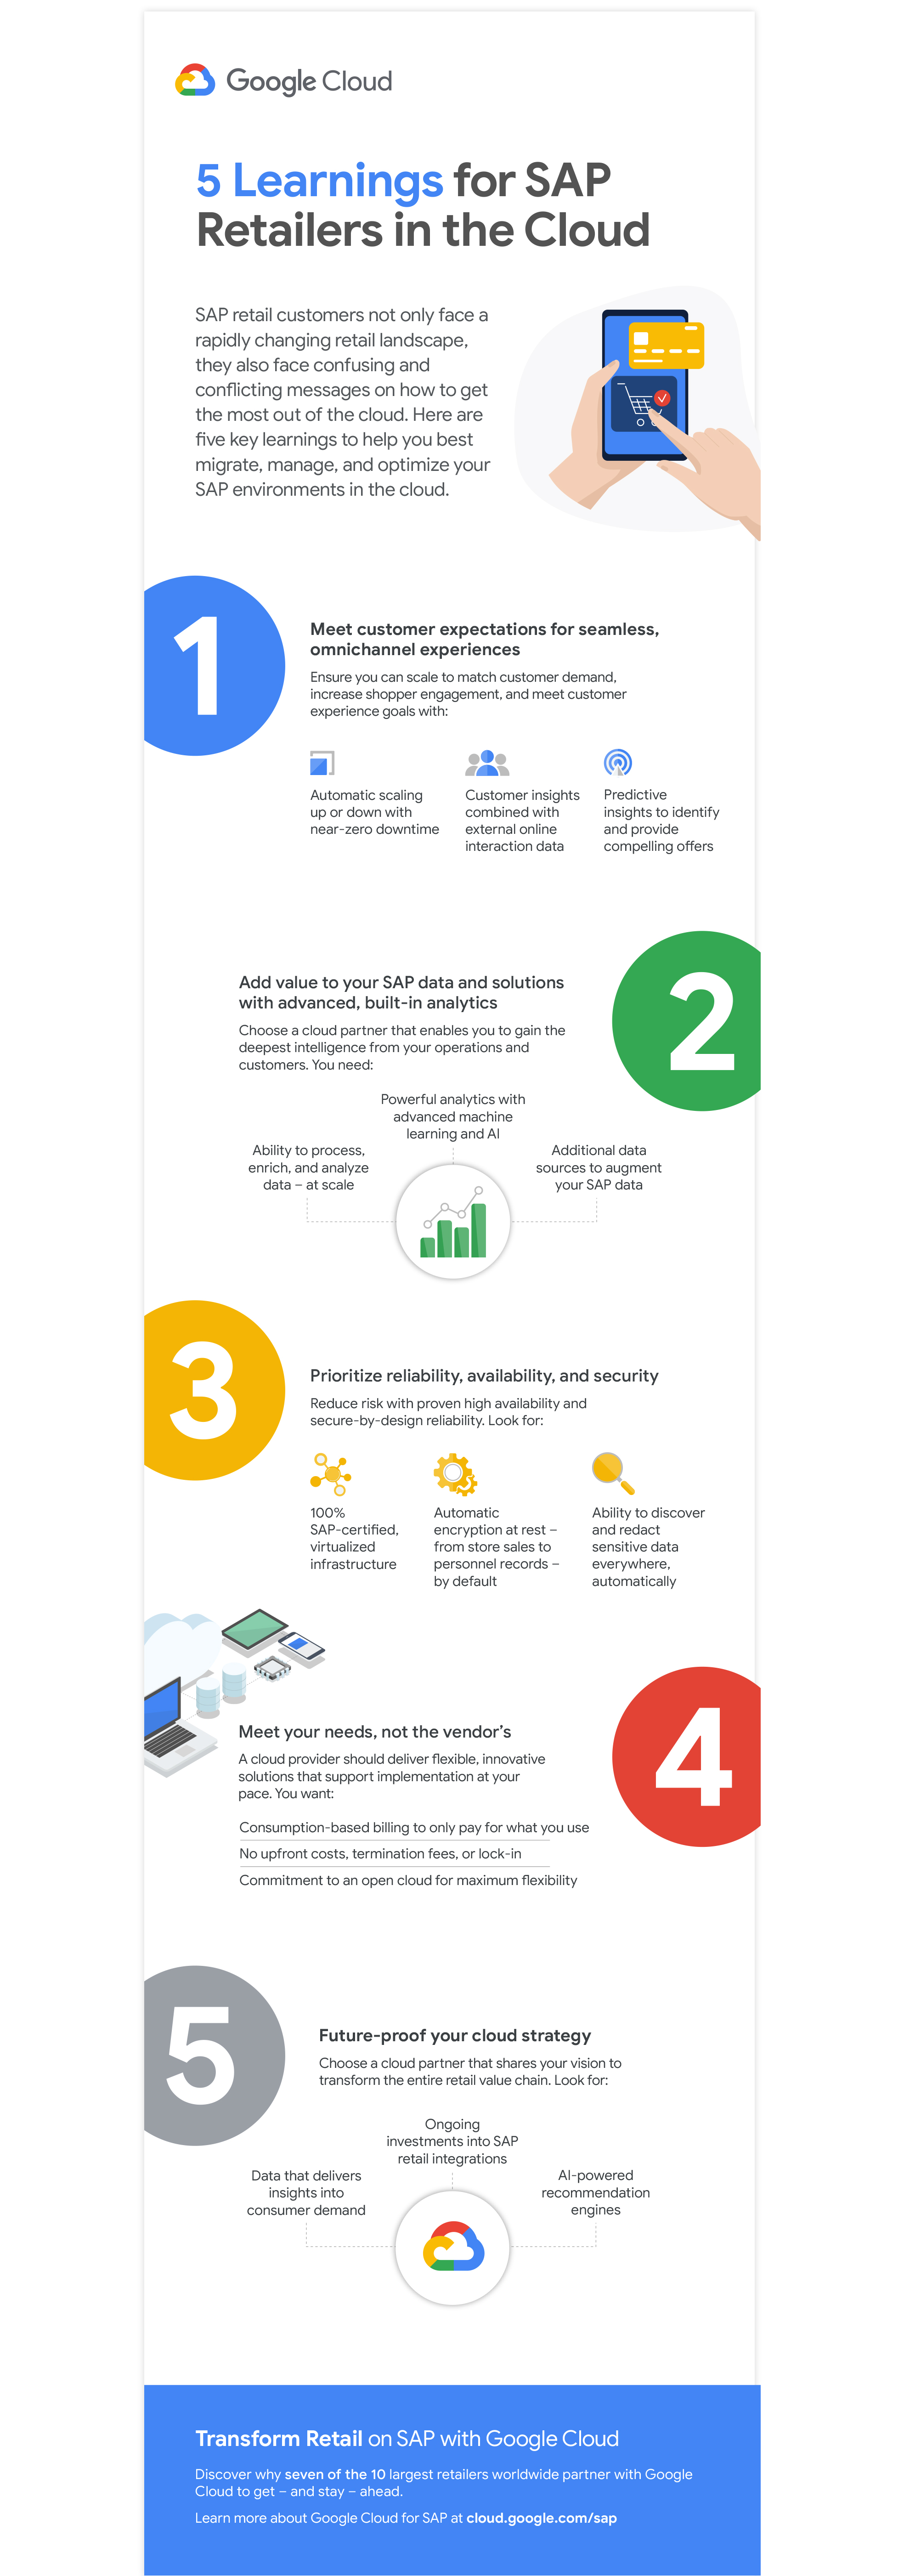 Google Cloud for SAP Retailers infographic